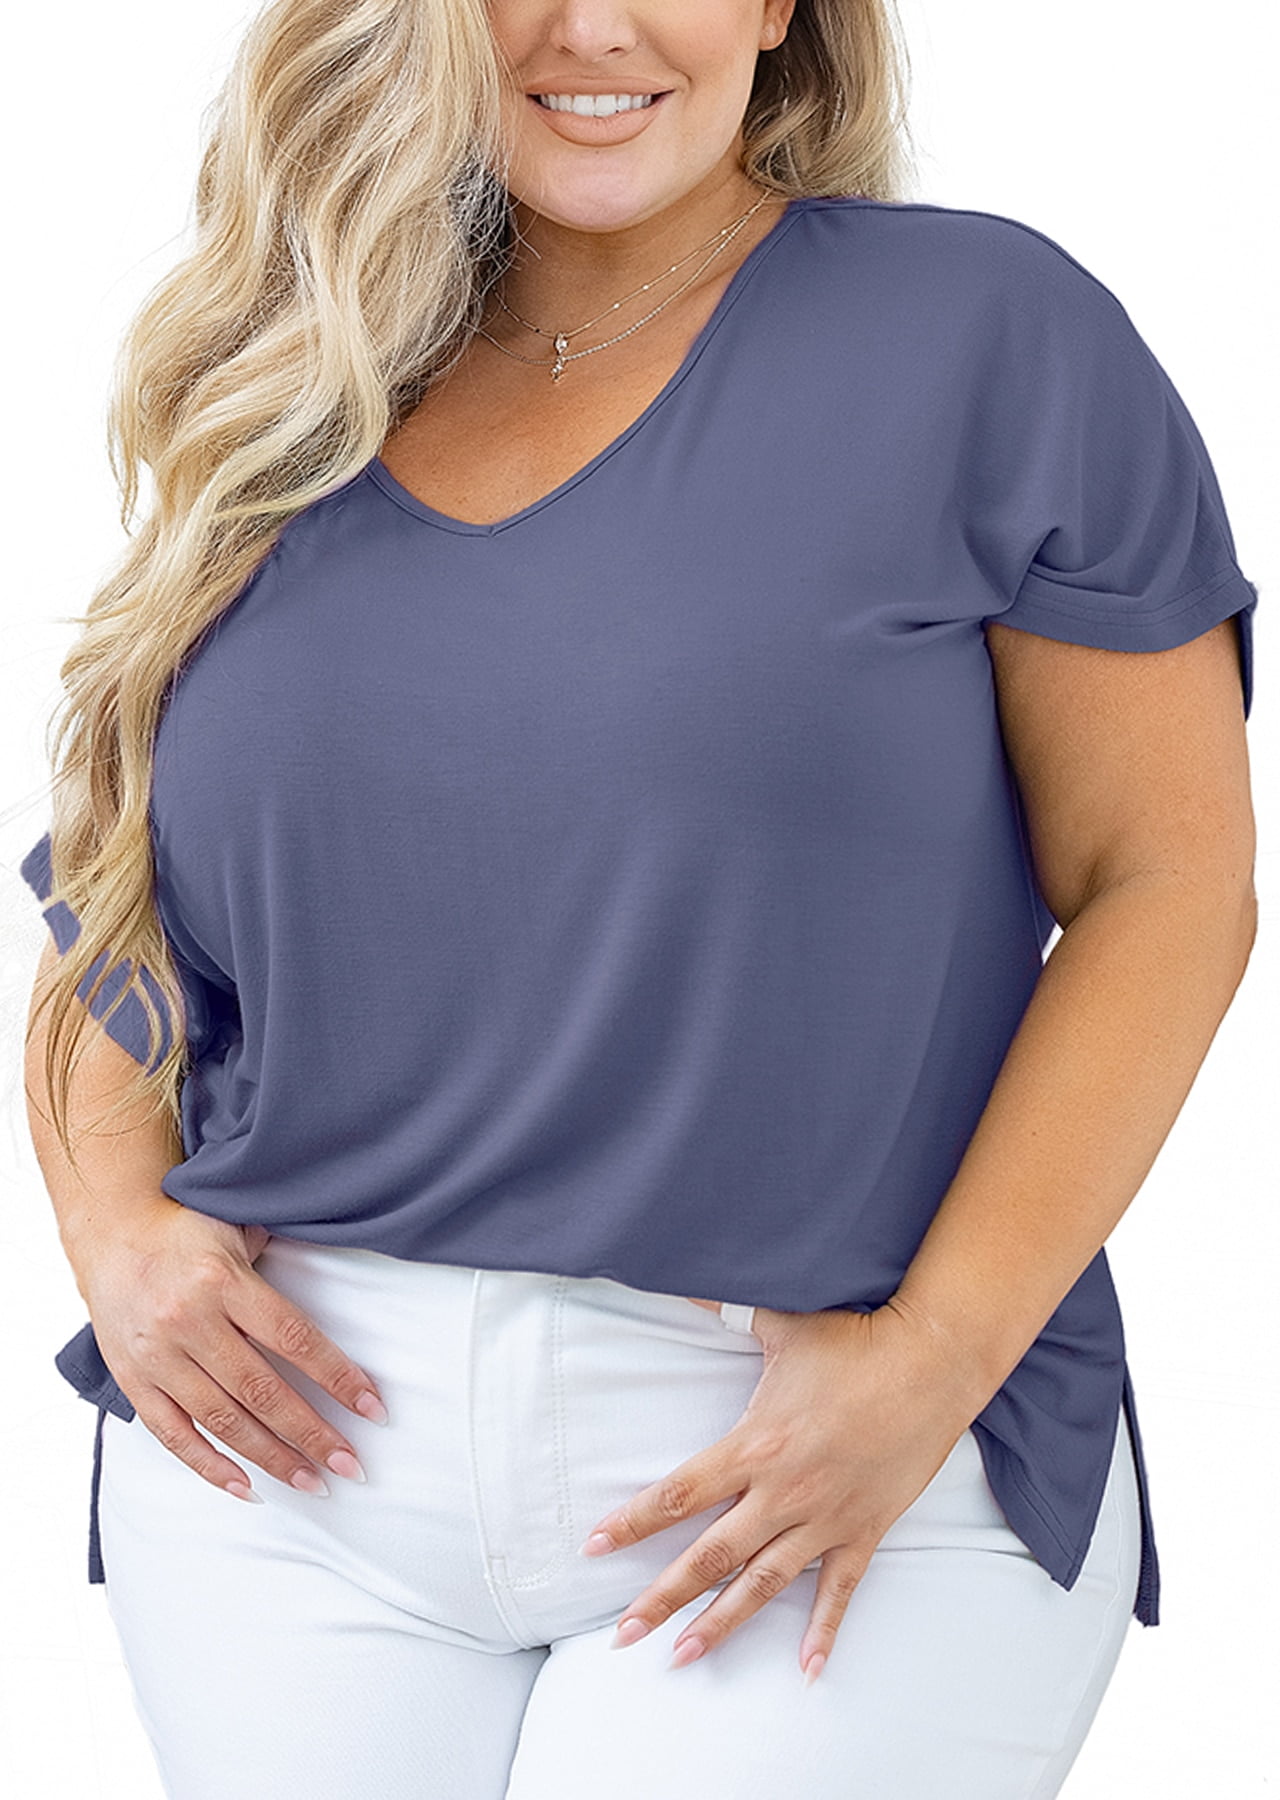 SHOWMALL Plus Size Women Top 3/4 Sleeve Clothes Royal Blue 4X Blouse Swing  Tunic Crewneck Loose Clothing Shirt for Leggings